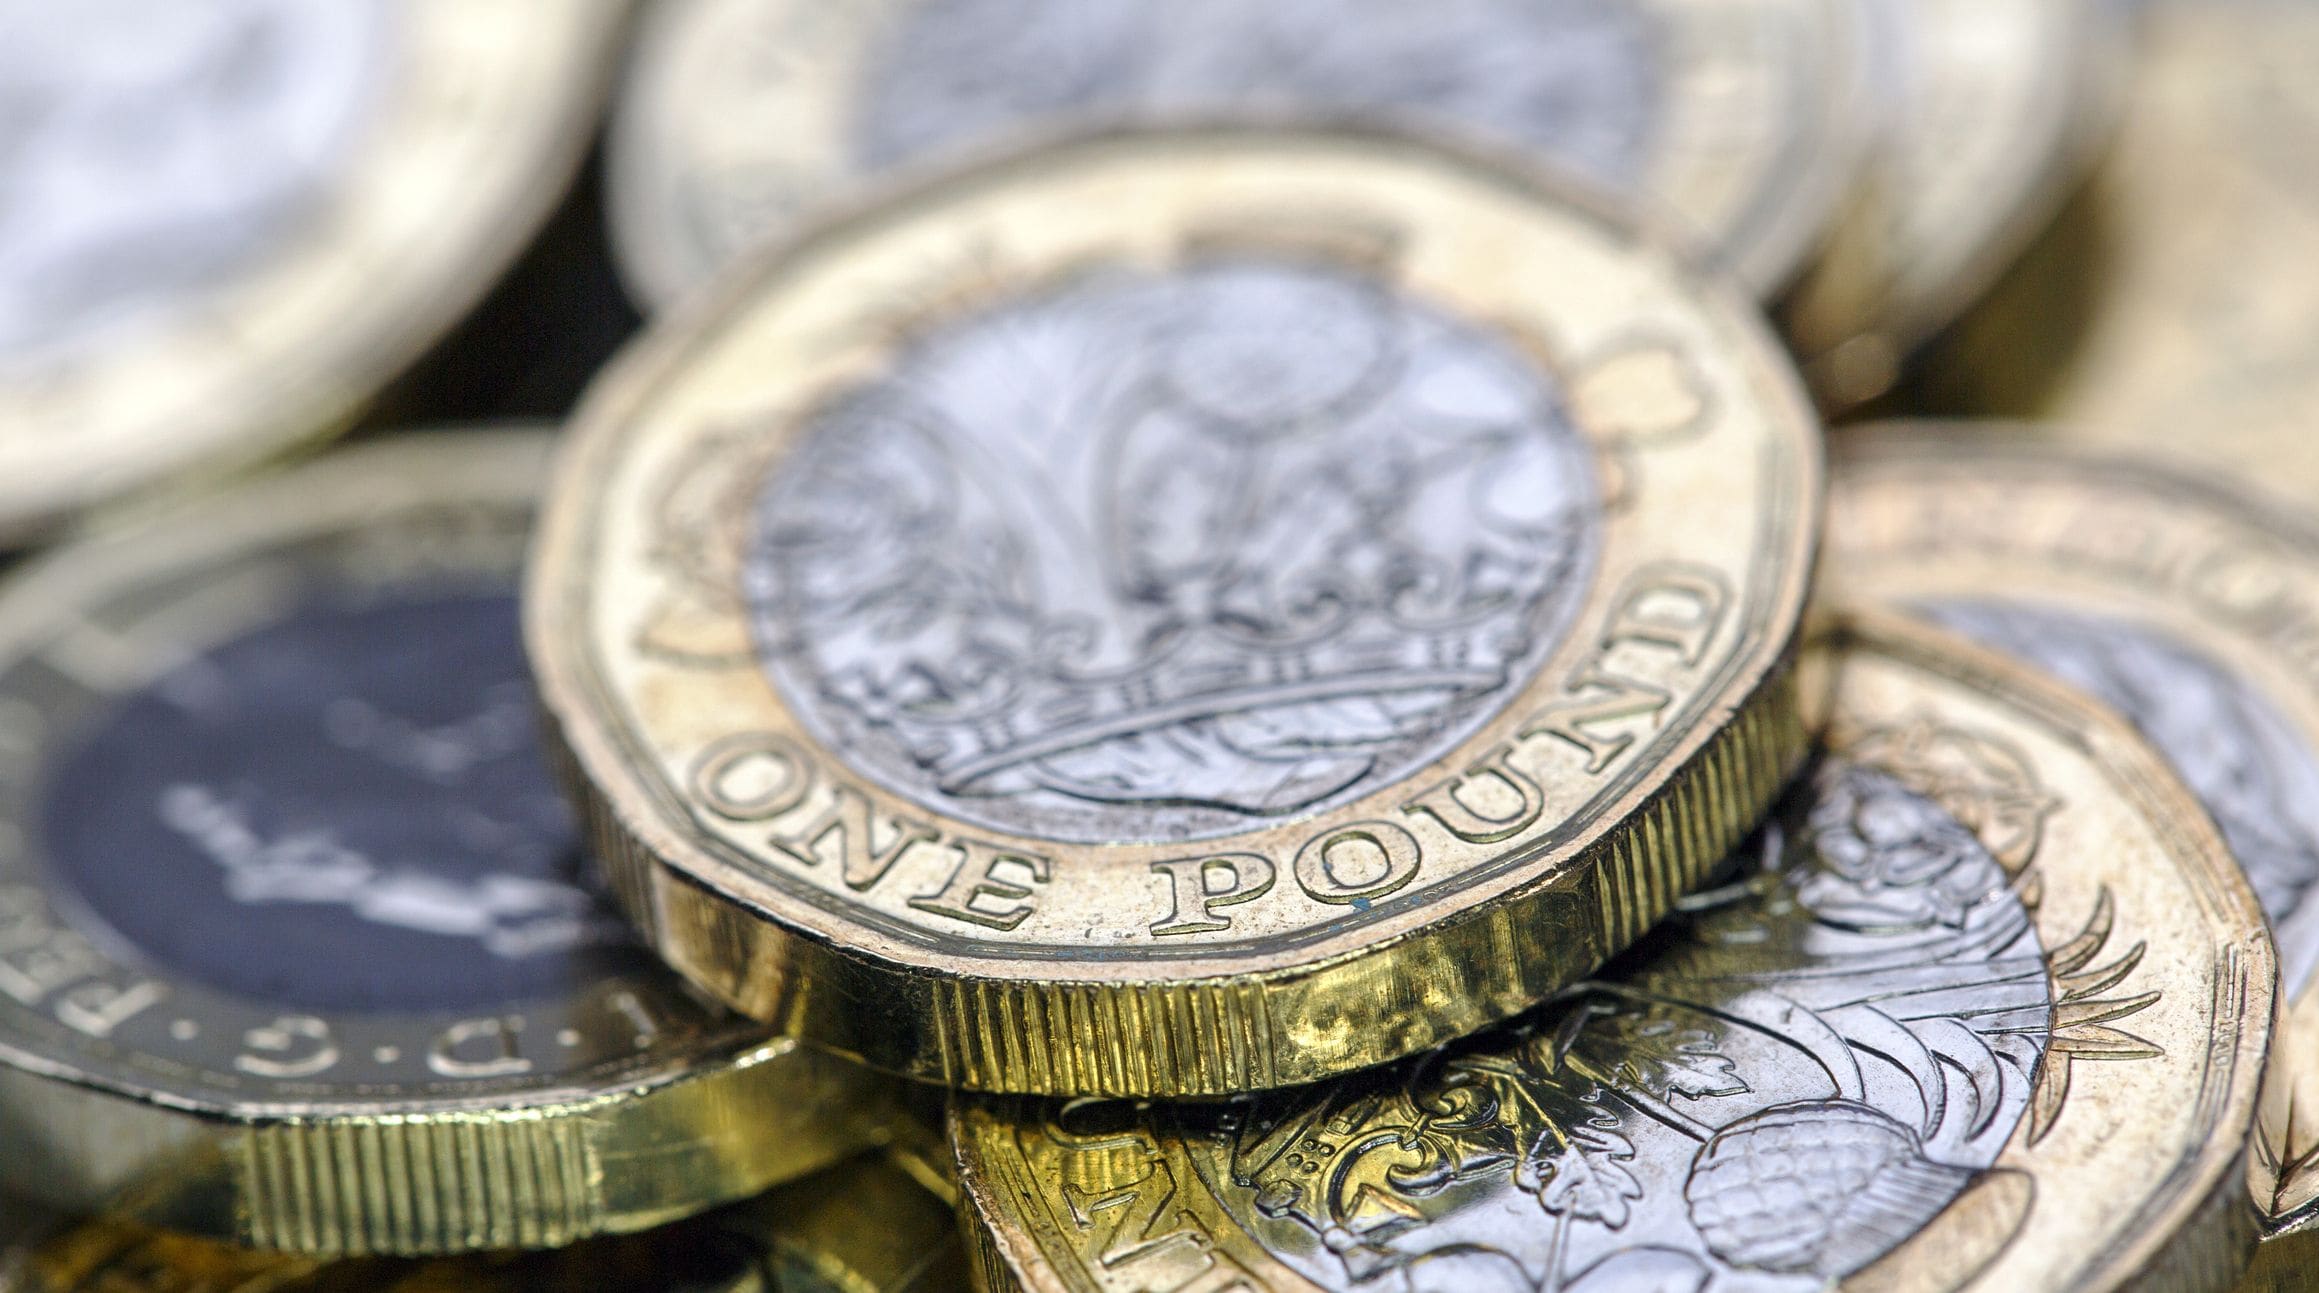 Image shows a close-up of a pile of £1 coins.